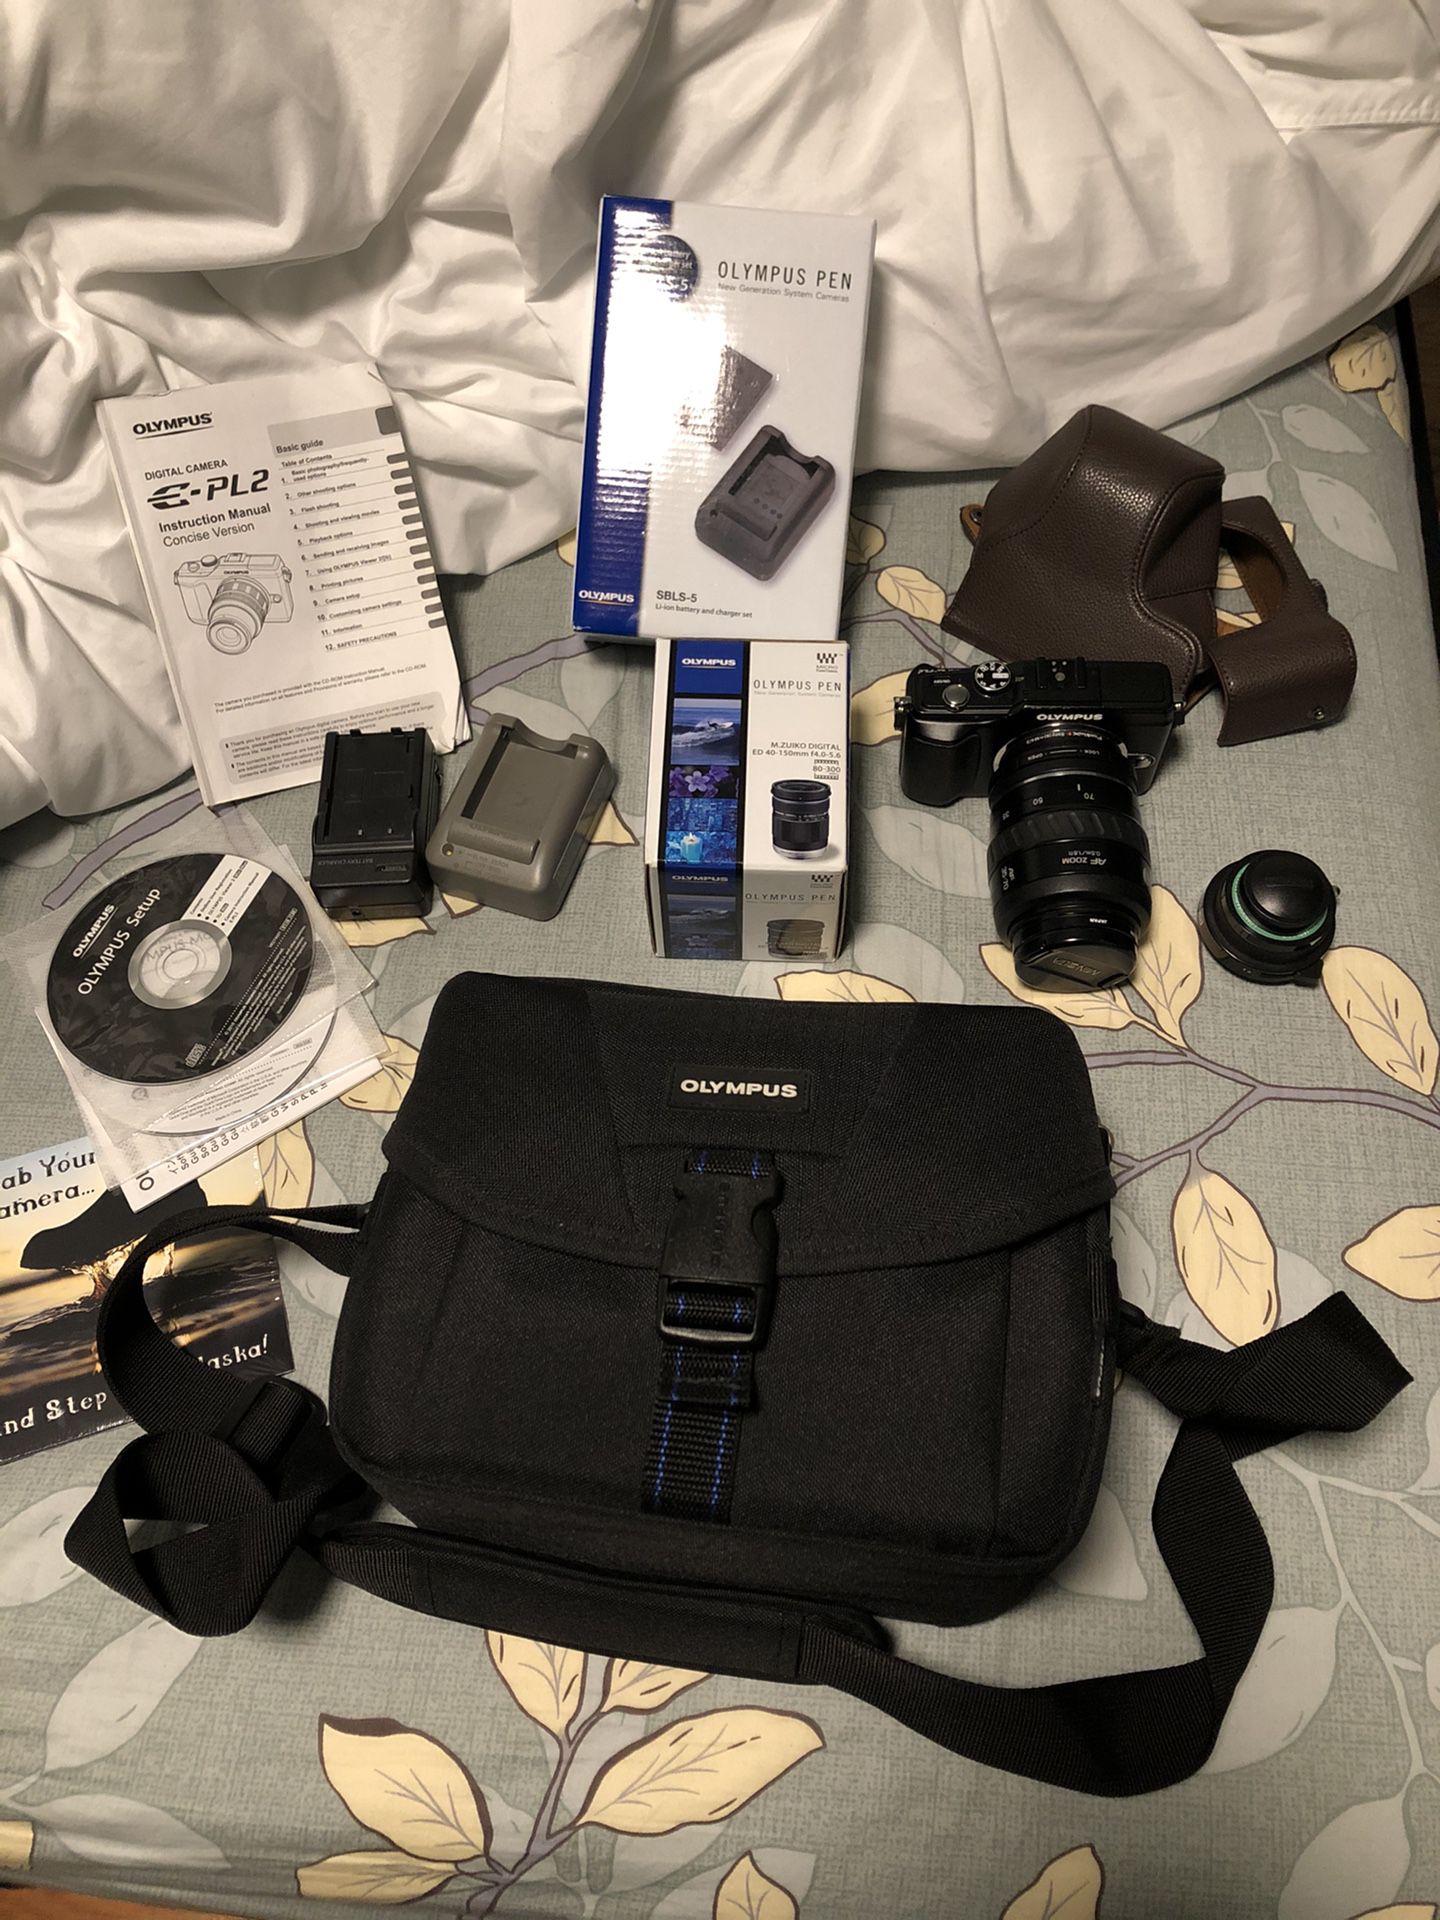 Olympus EPL 2 Mirrorless camera with 3 lens and extras